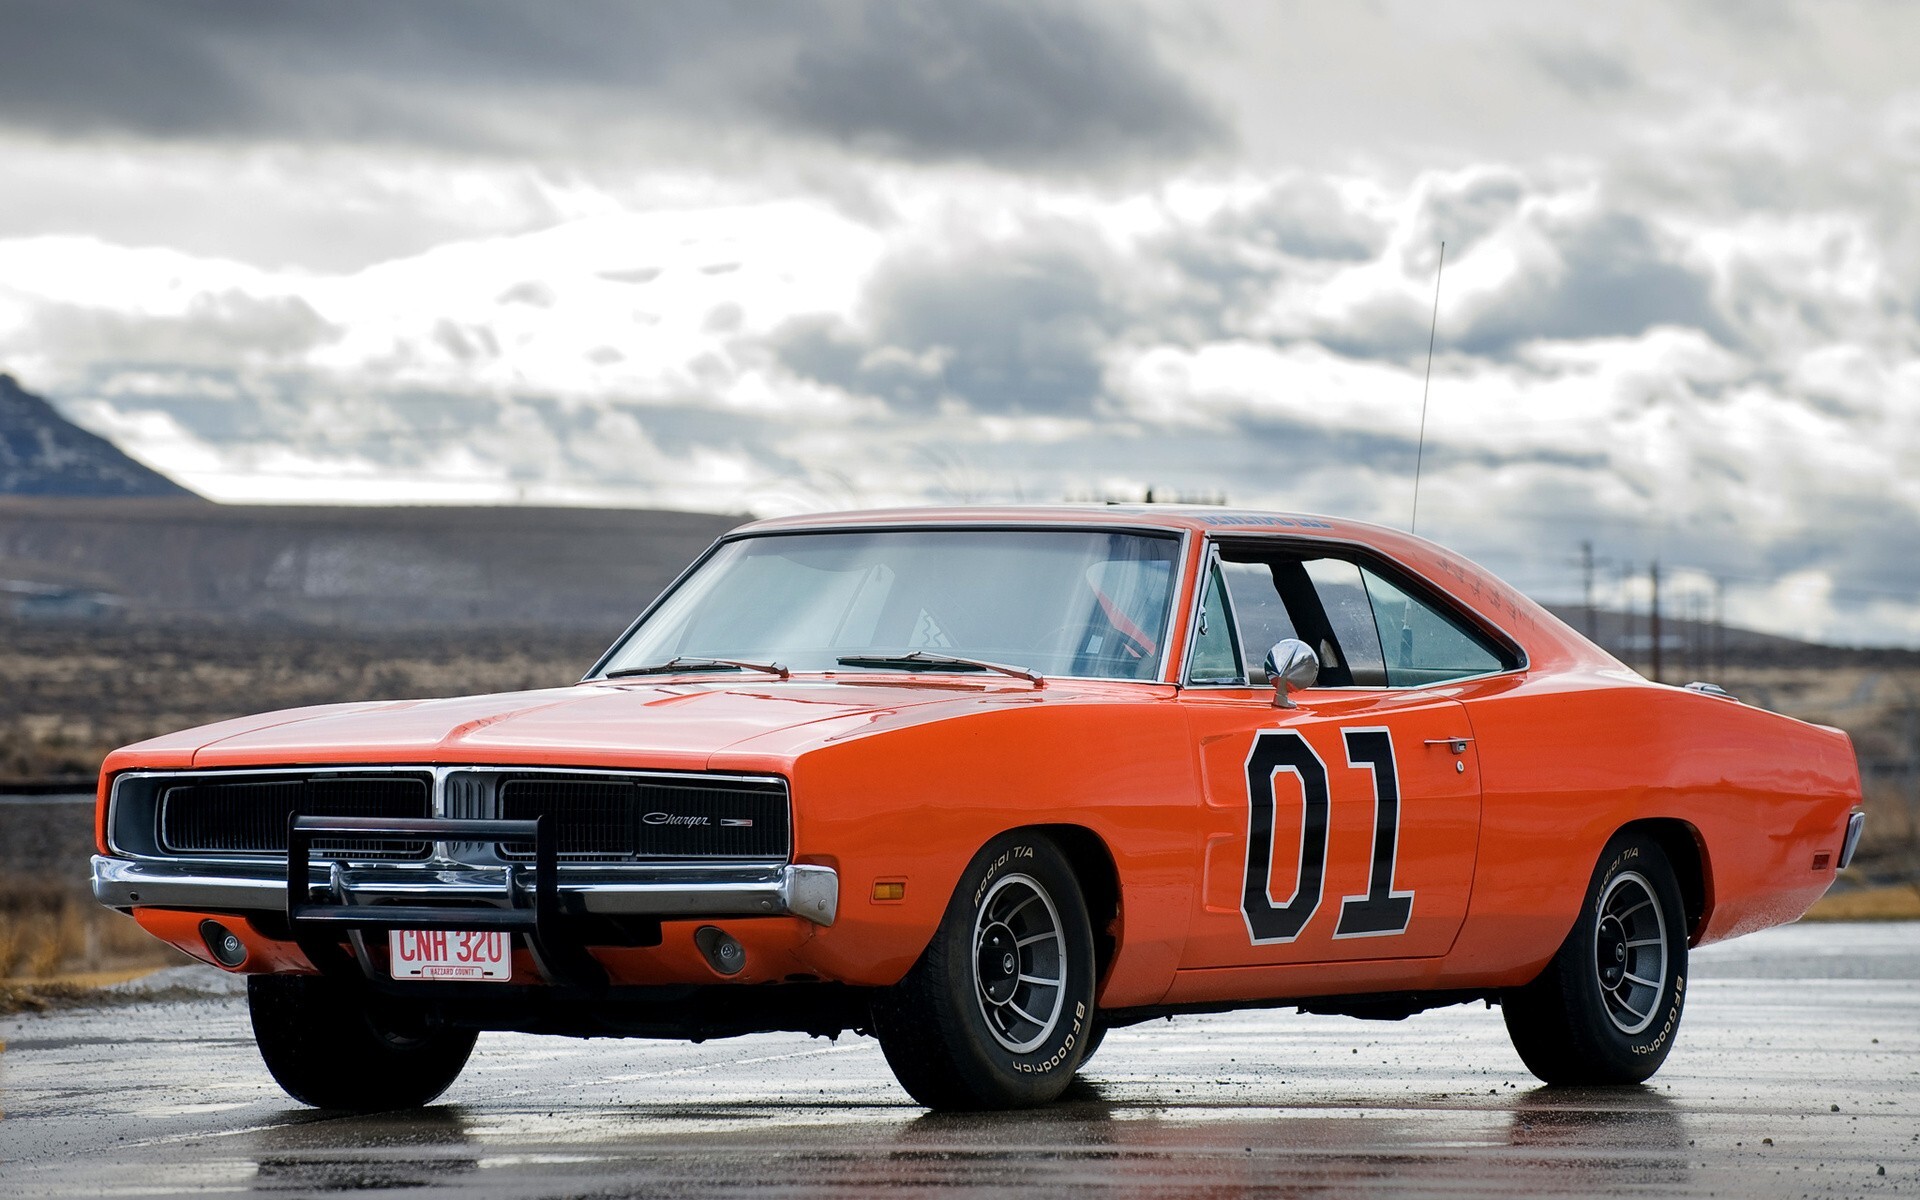 General Lee Car: CNH 320 license plate, The famous orange '69 Charger, Black grille guard, The star of the show. 1920x1200 HD Wallpaper.